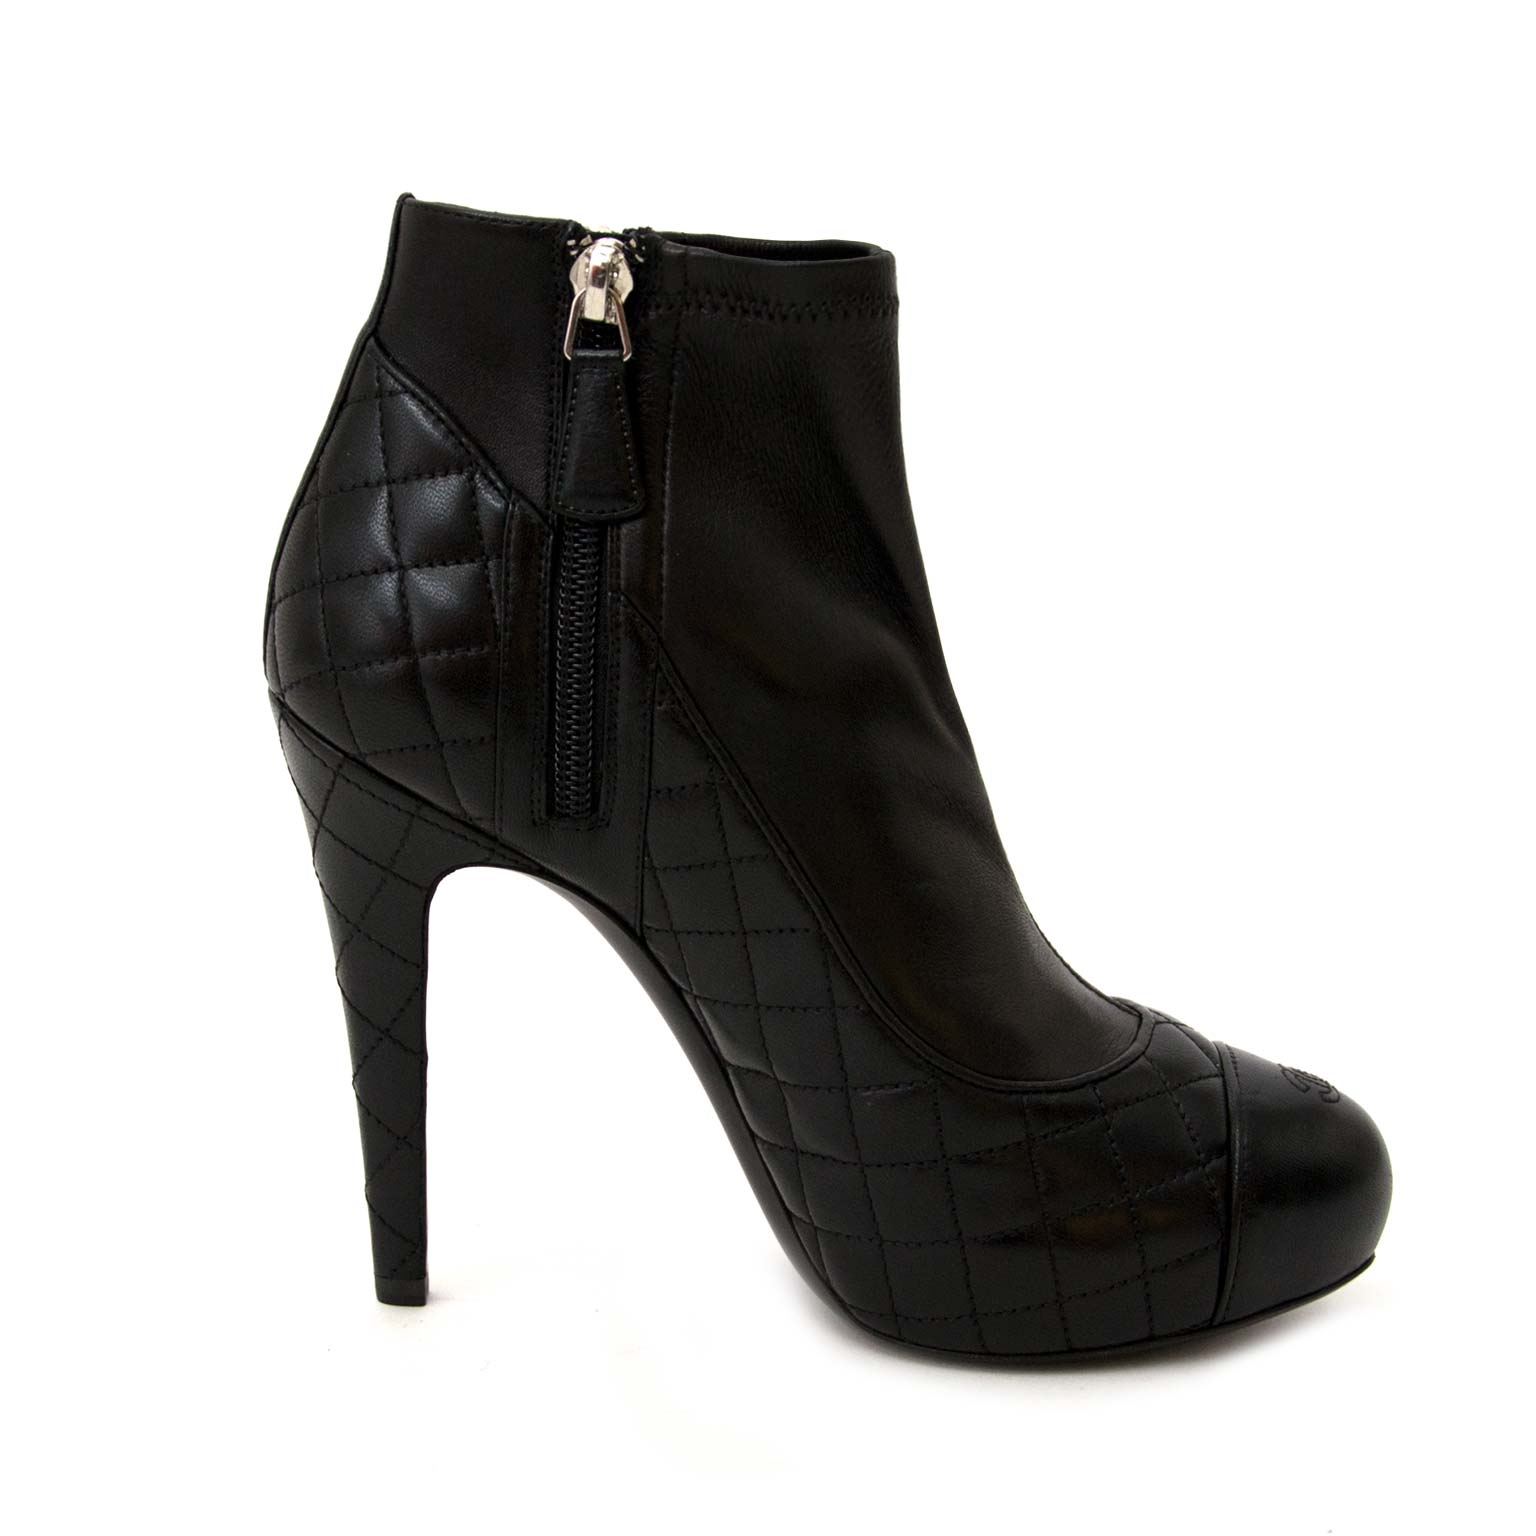 Chanel Quilted Leather Lace-Up Platform Ankle Boots - Closet Upgrade